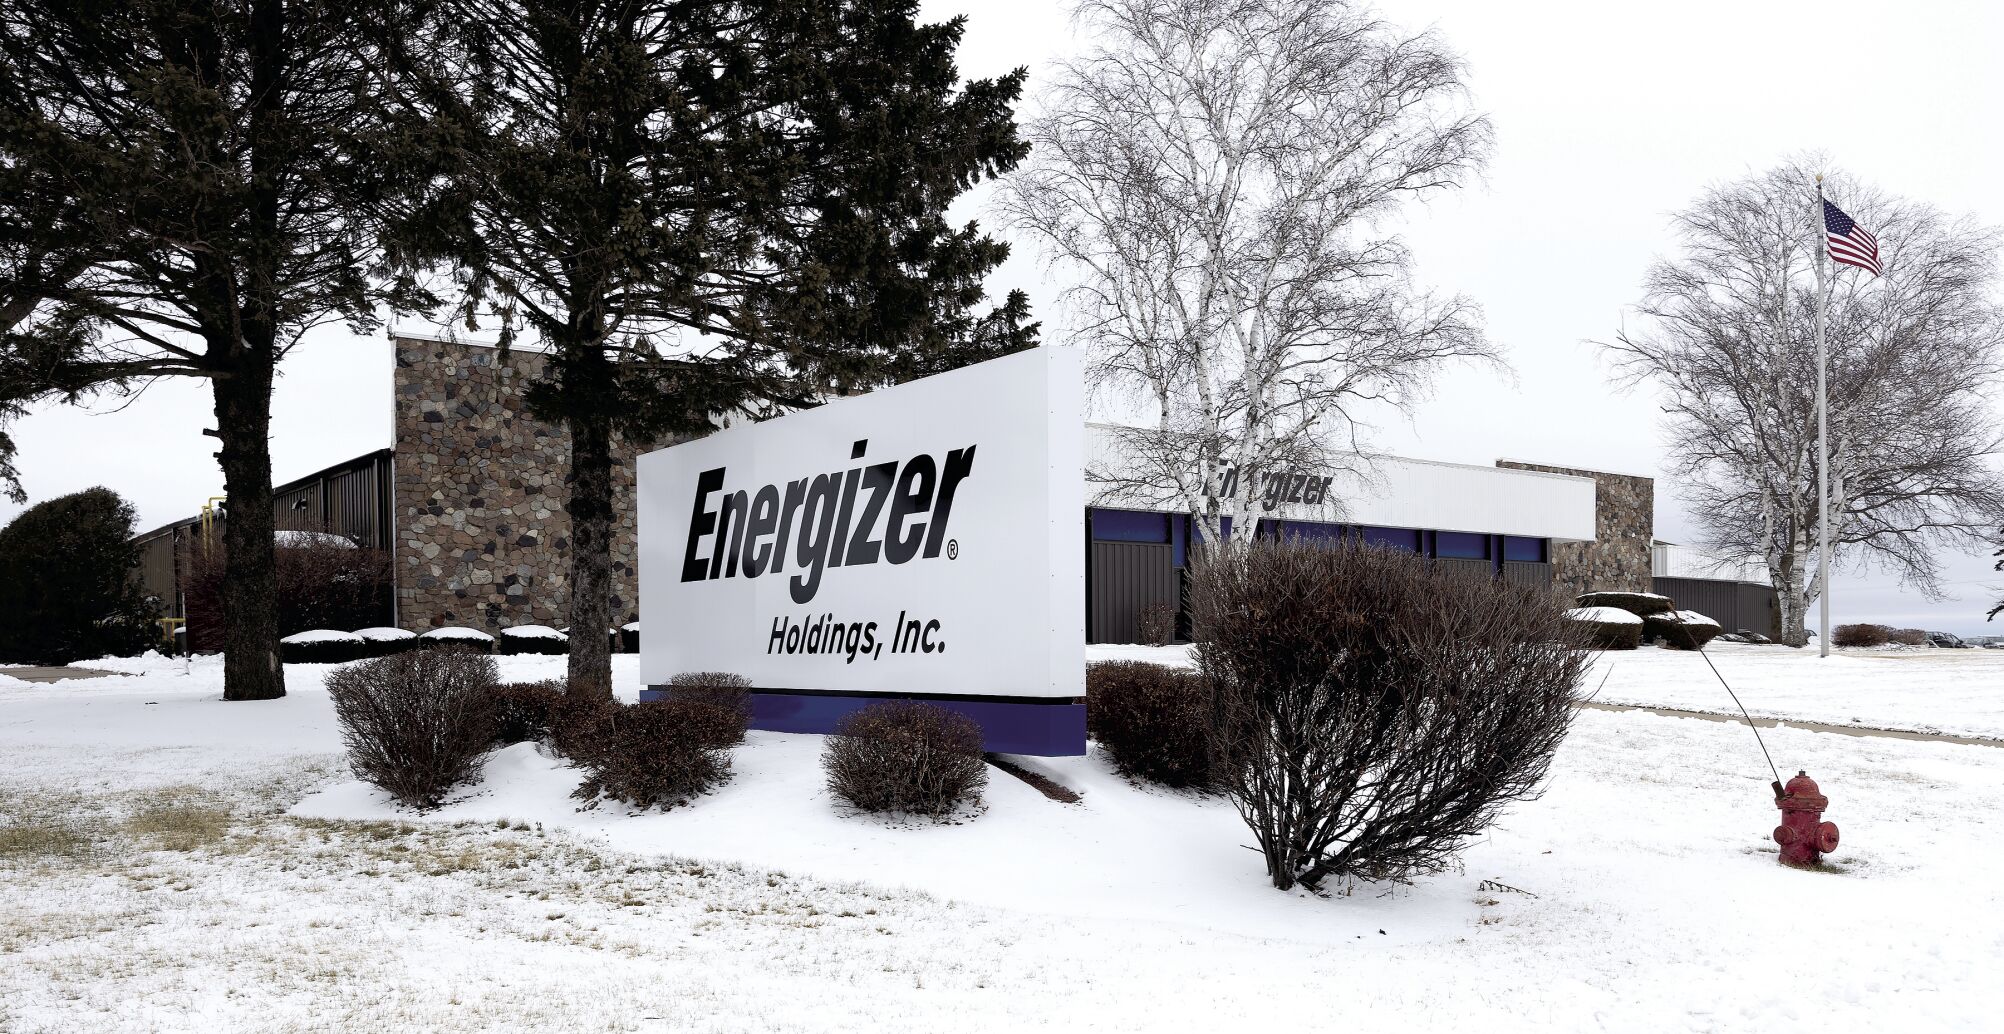 The Energizer Holdings Inc. plant in Fennimore, Wis., is slated for closure, company officials confirmed Tuesday.    PHOTO CREDIT: Stephen Gassman